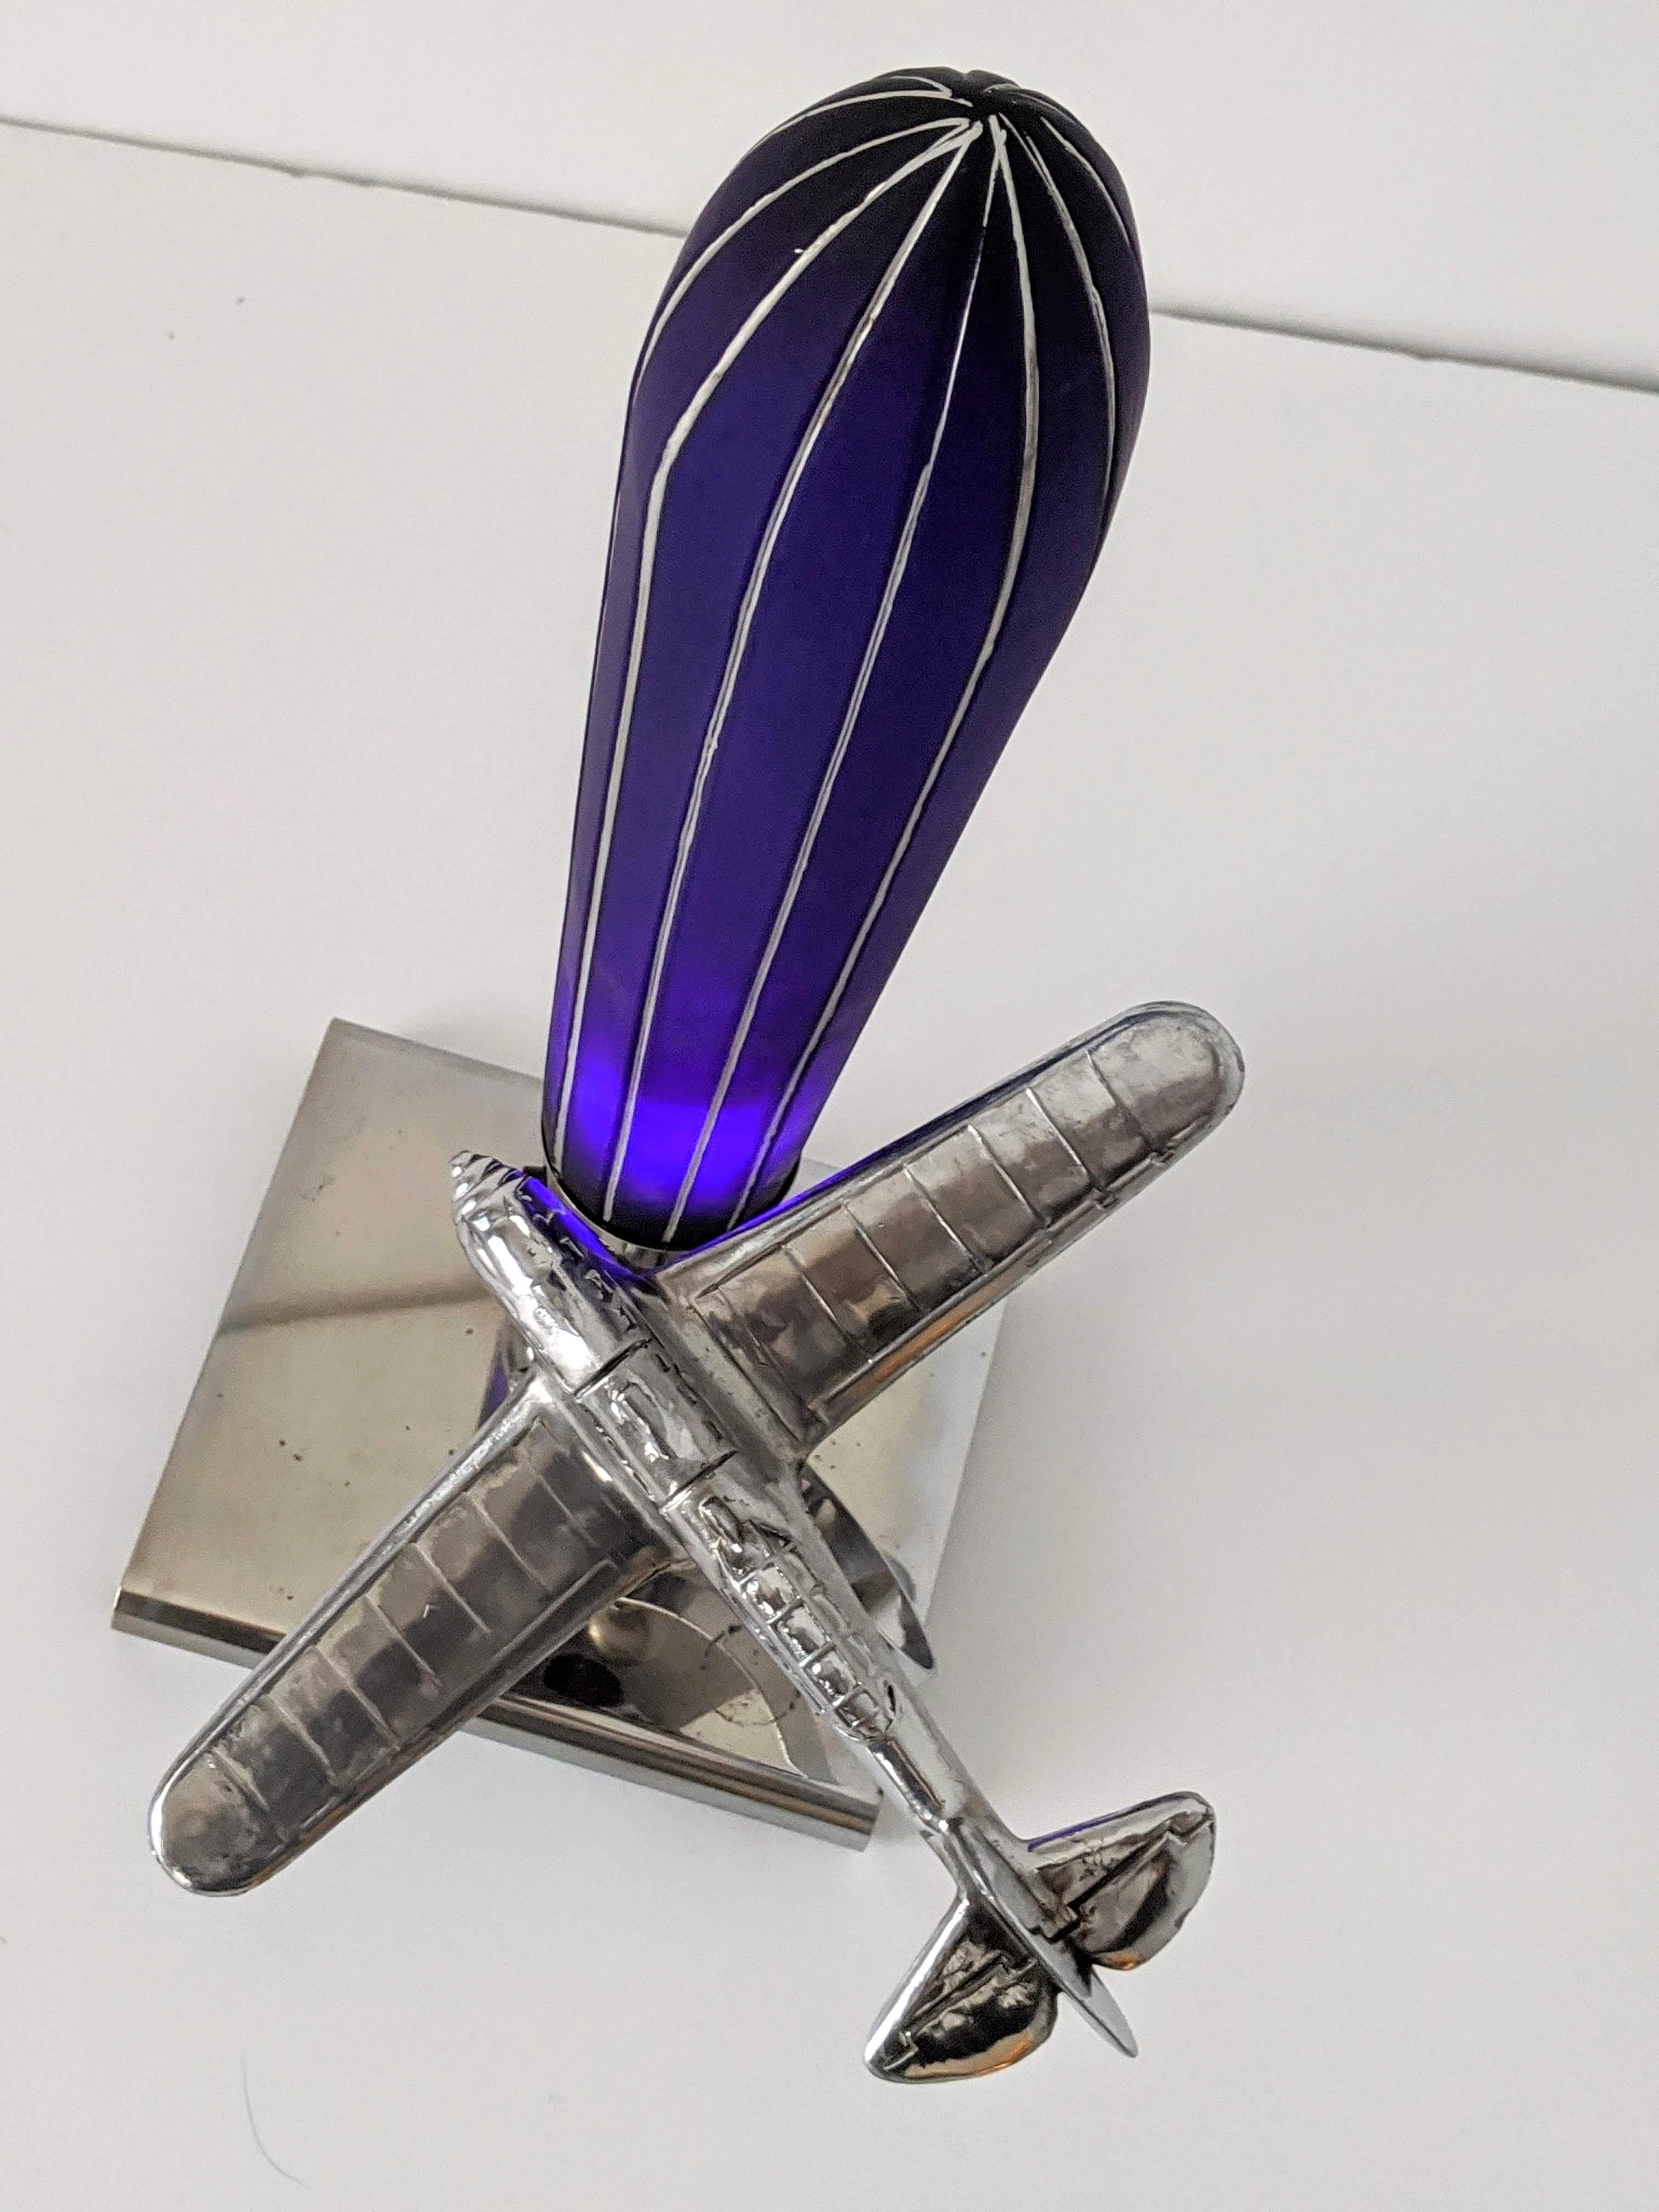 1930s Art Deco Chrome Airplane Table Lamp by Ray A. Schober, USA 1